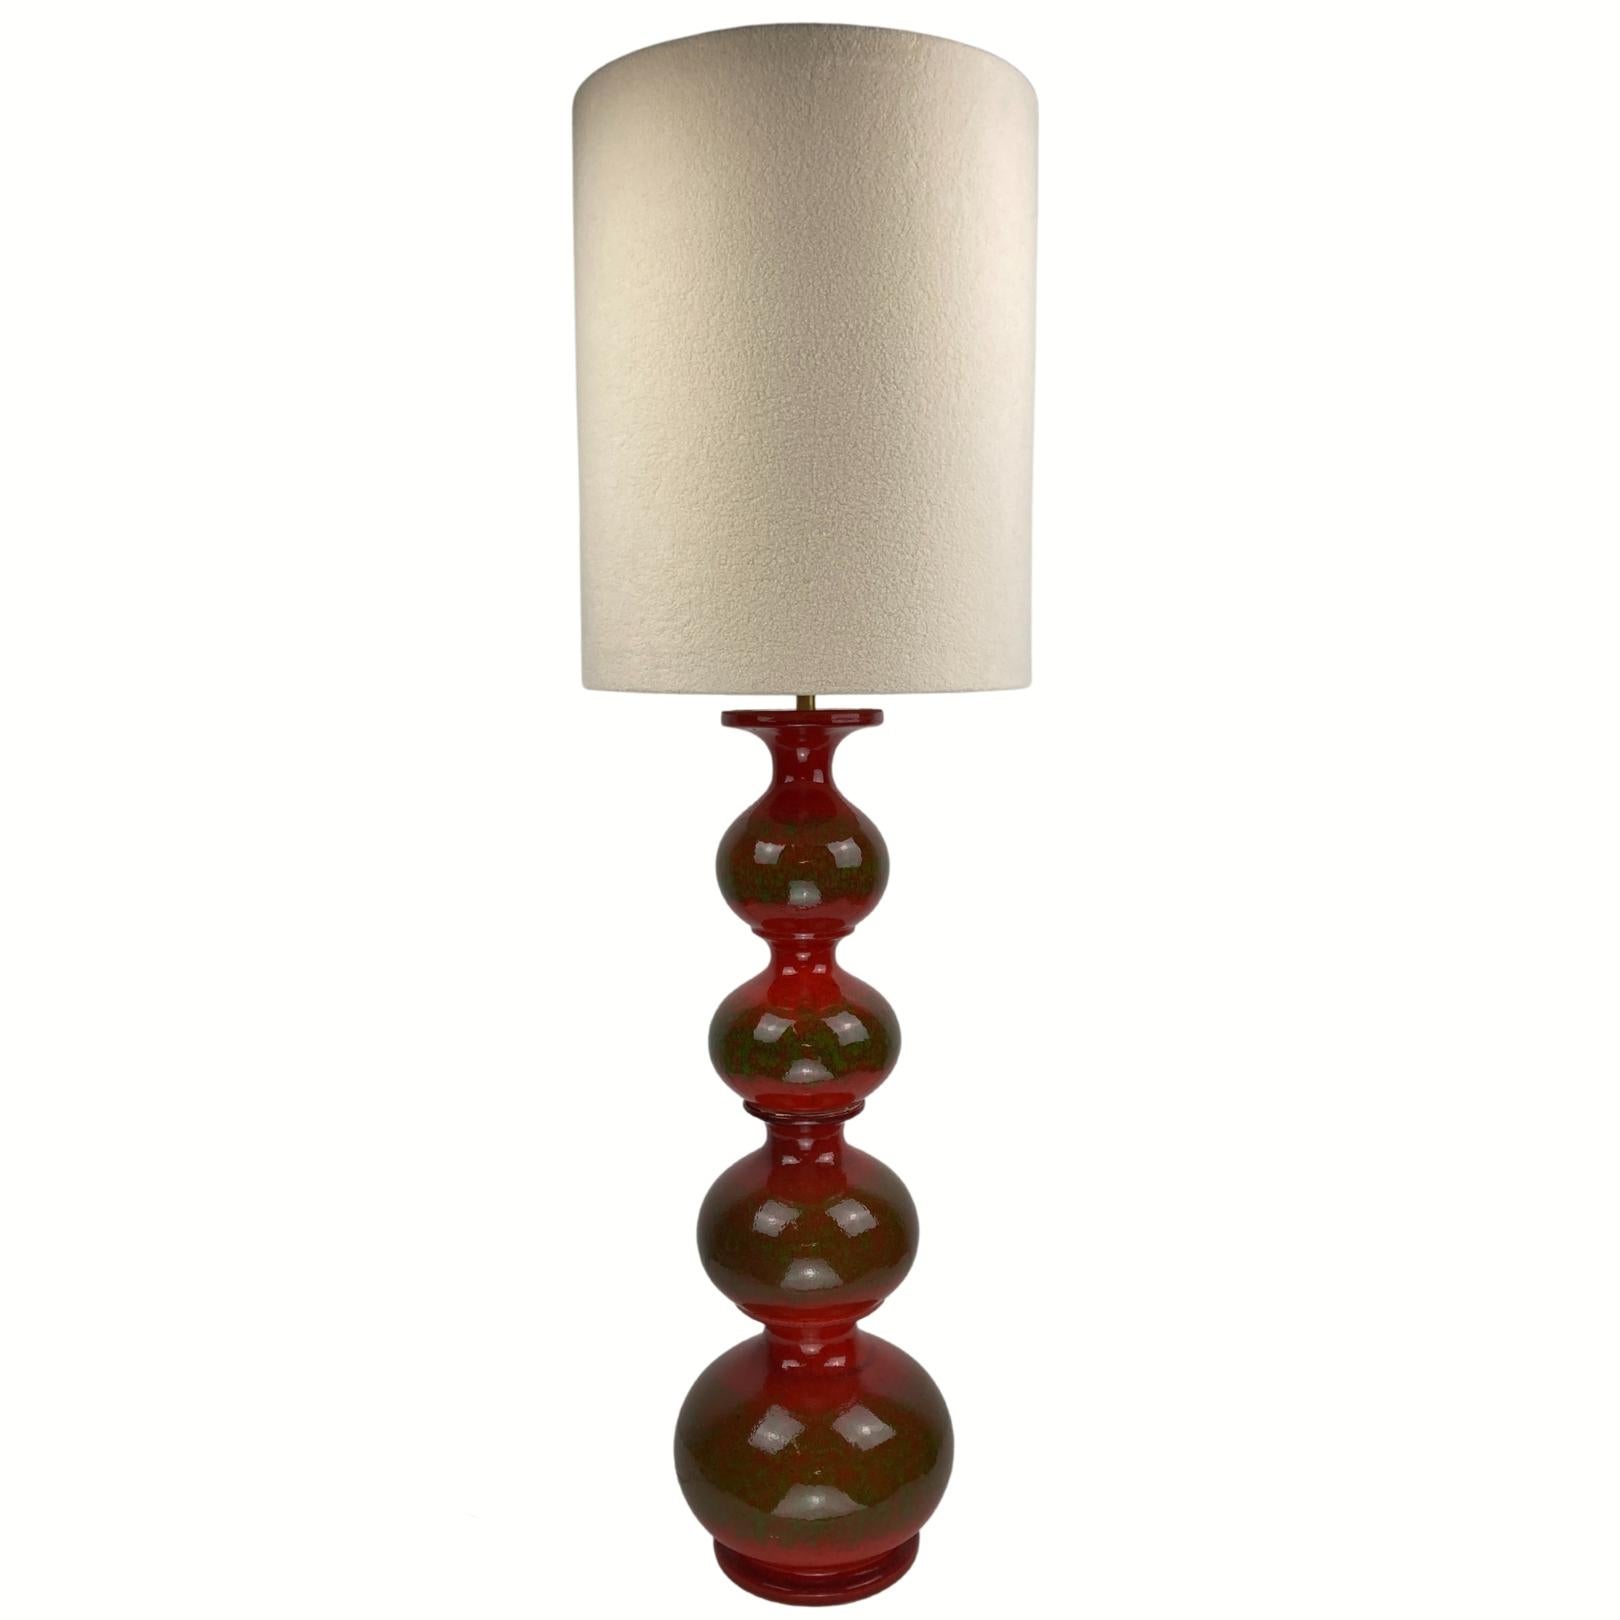 Ceramic bubbly wavy floor or table lamp by Kaiser Leuchten, 1960s For Sale 9